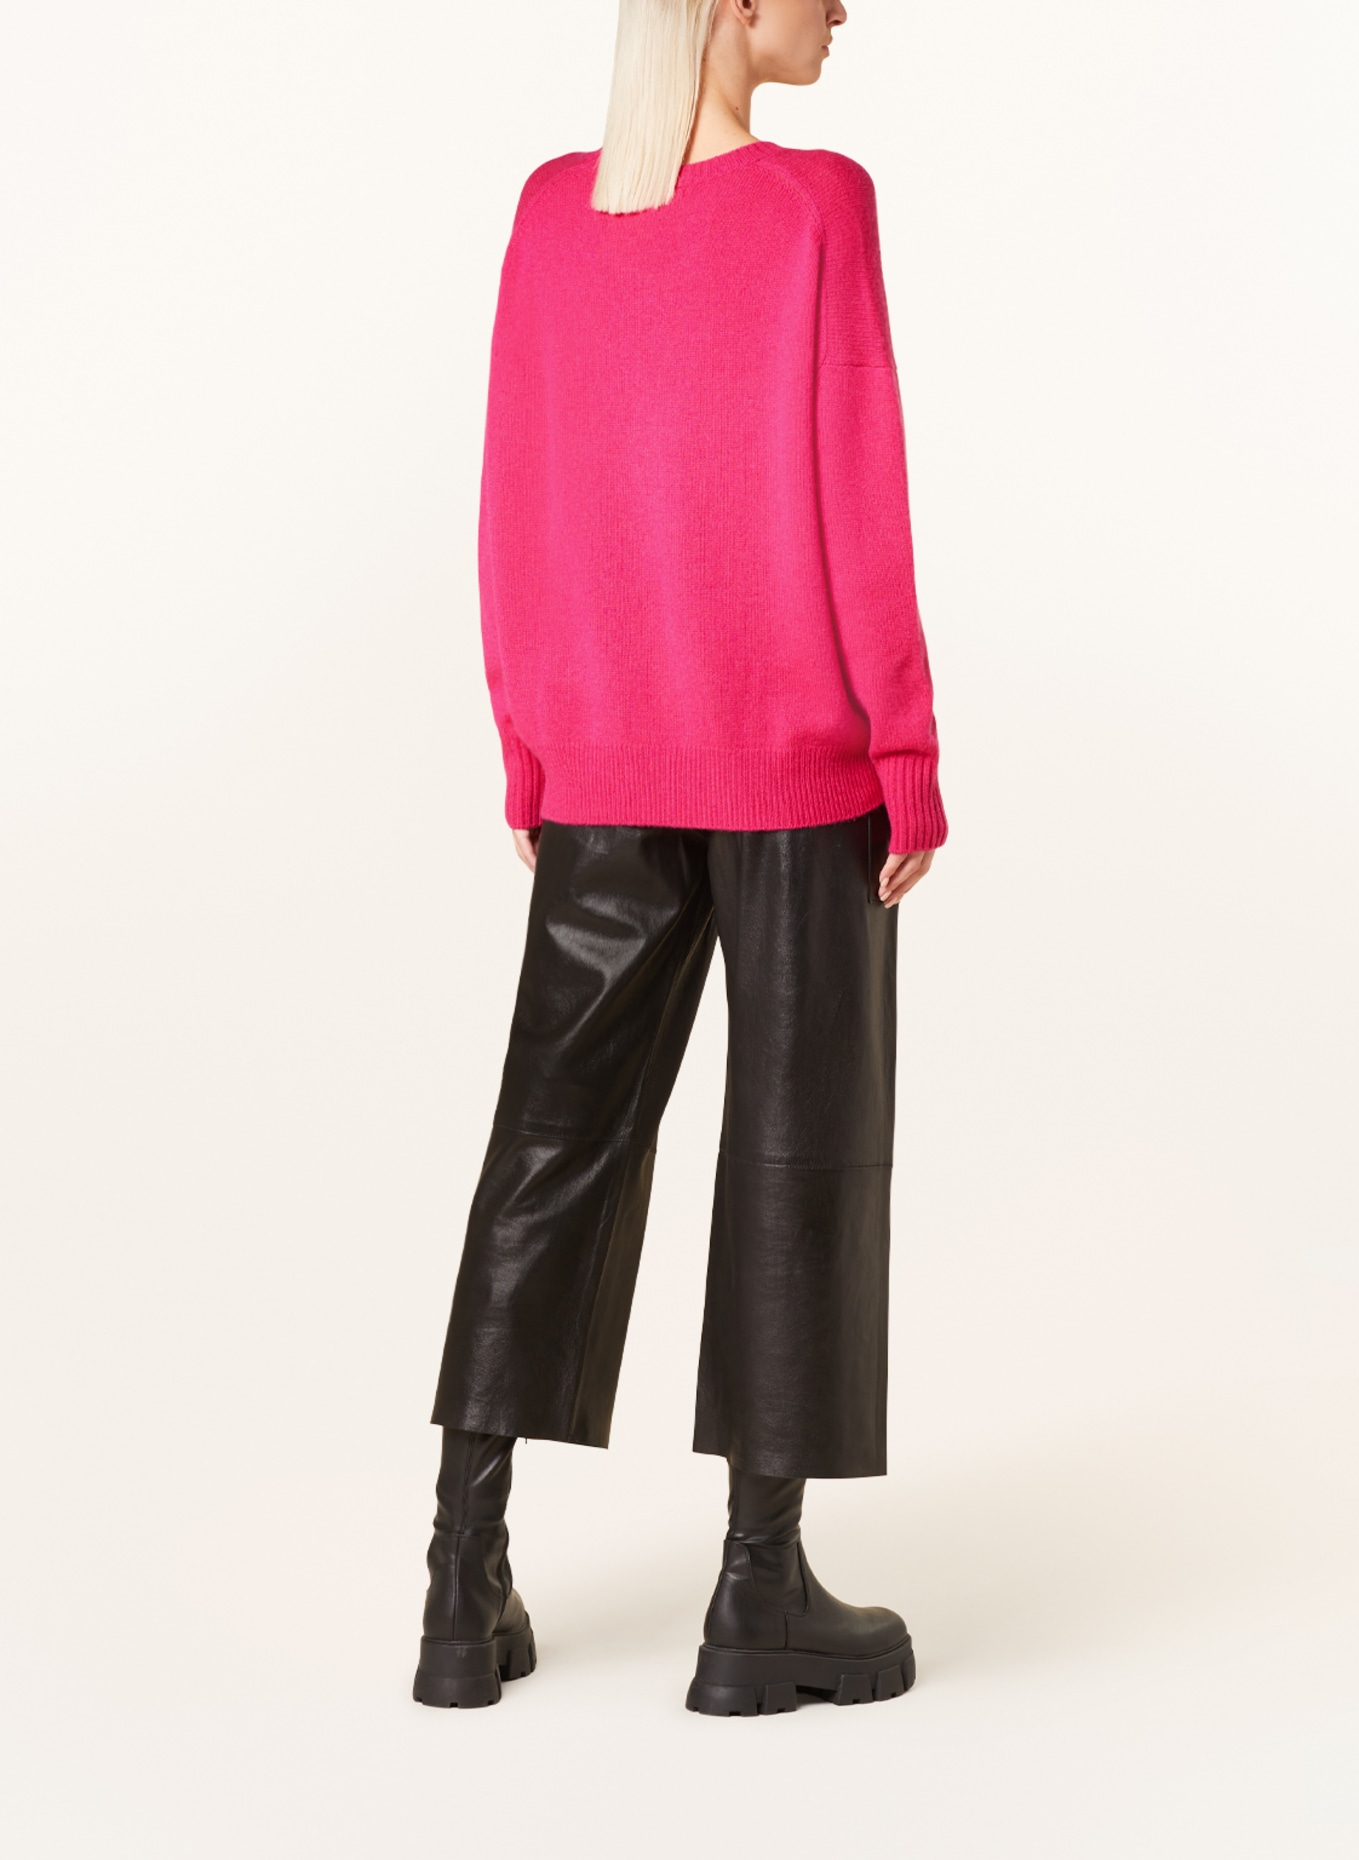 (THE MERCER) N.Y. Cashmere-Pullover, Farbe: PINK (Bild 3)